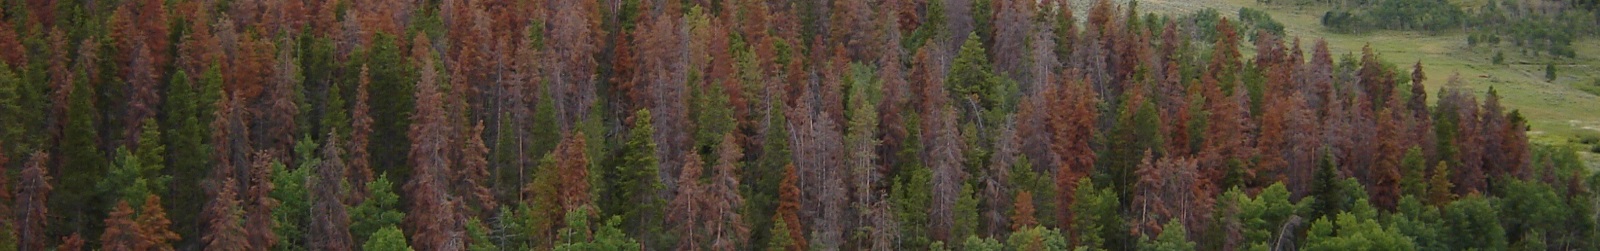 Forest Health | Colorado Timber Industry Association